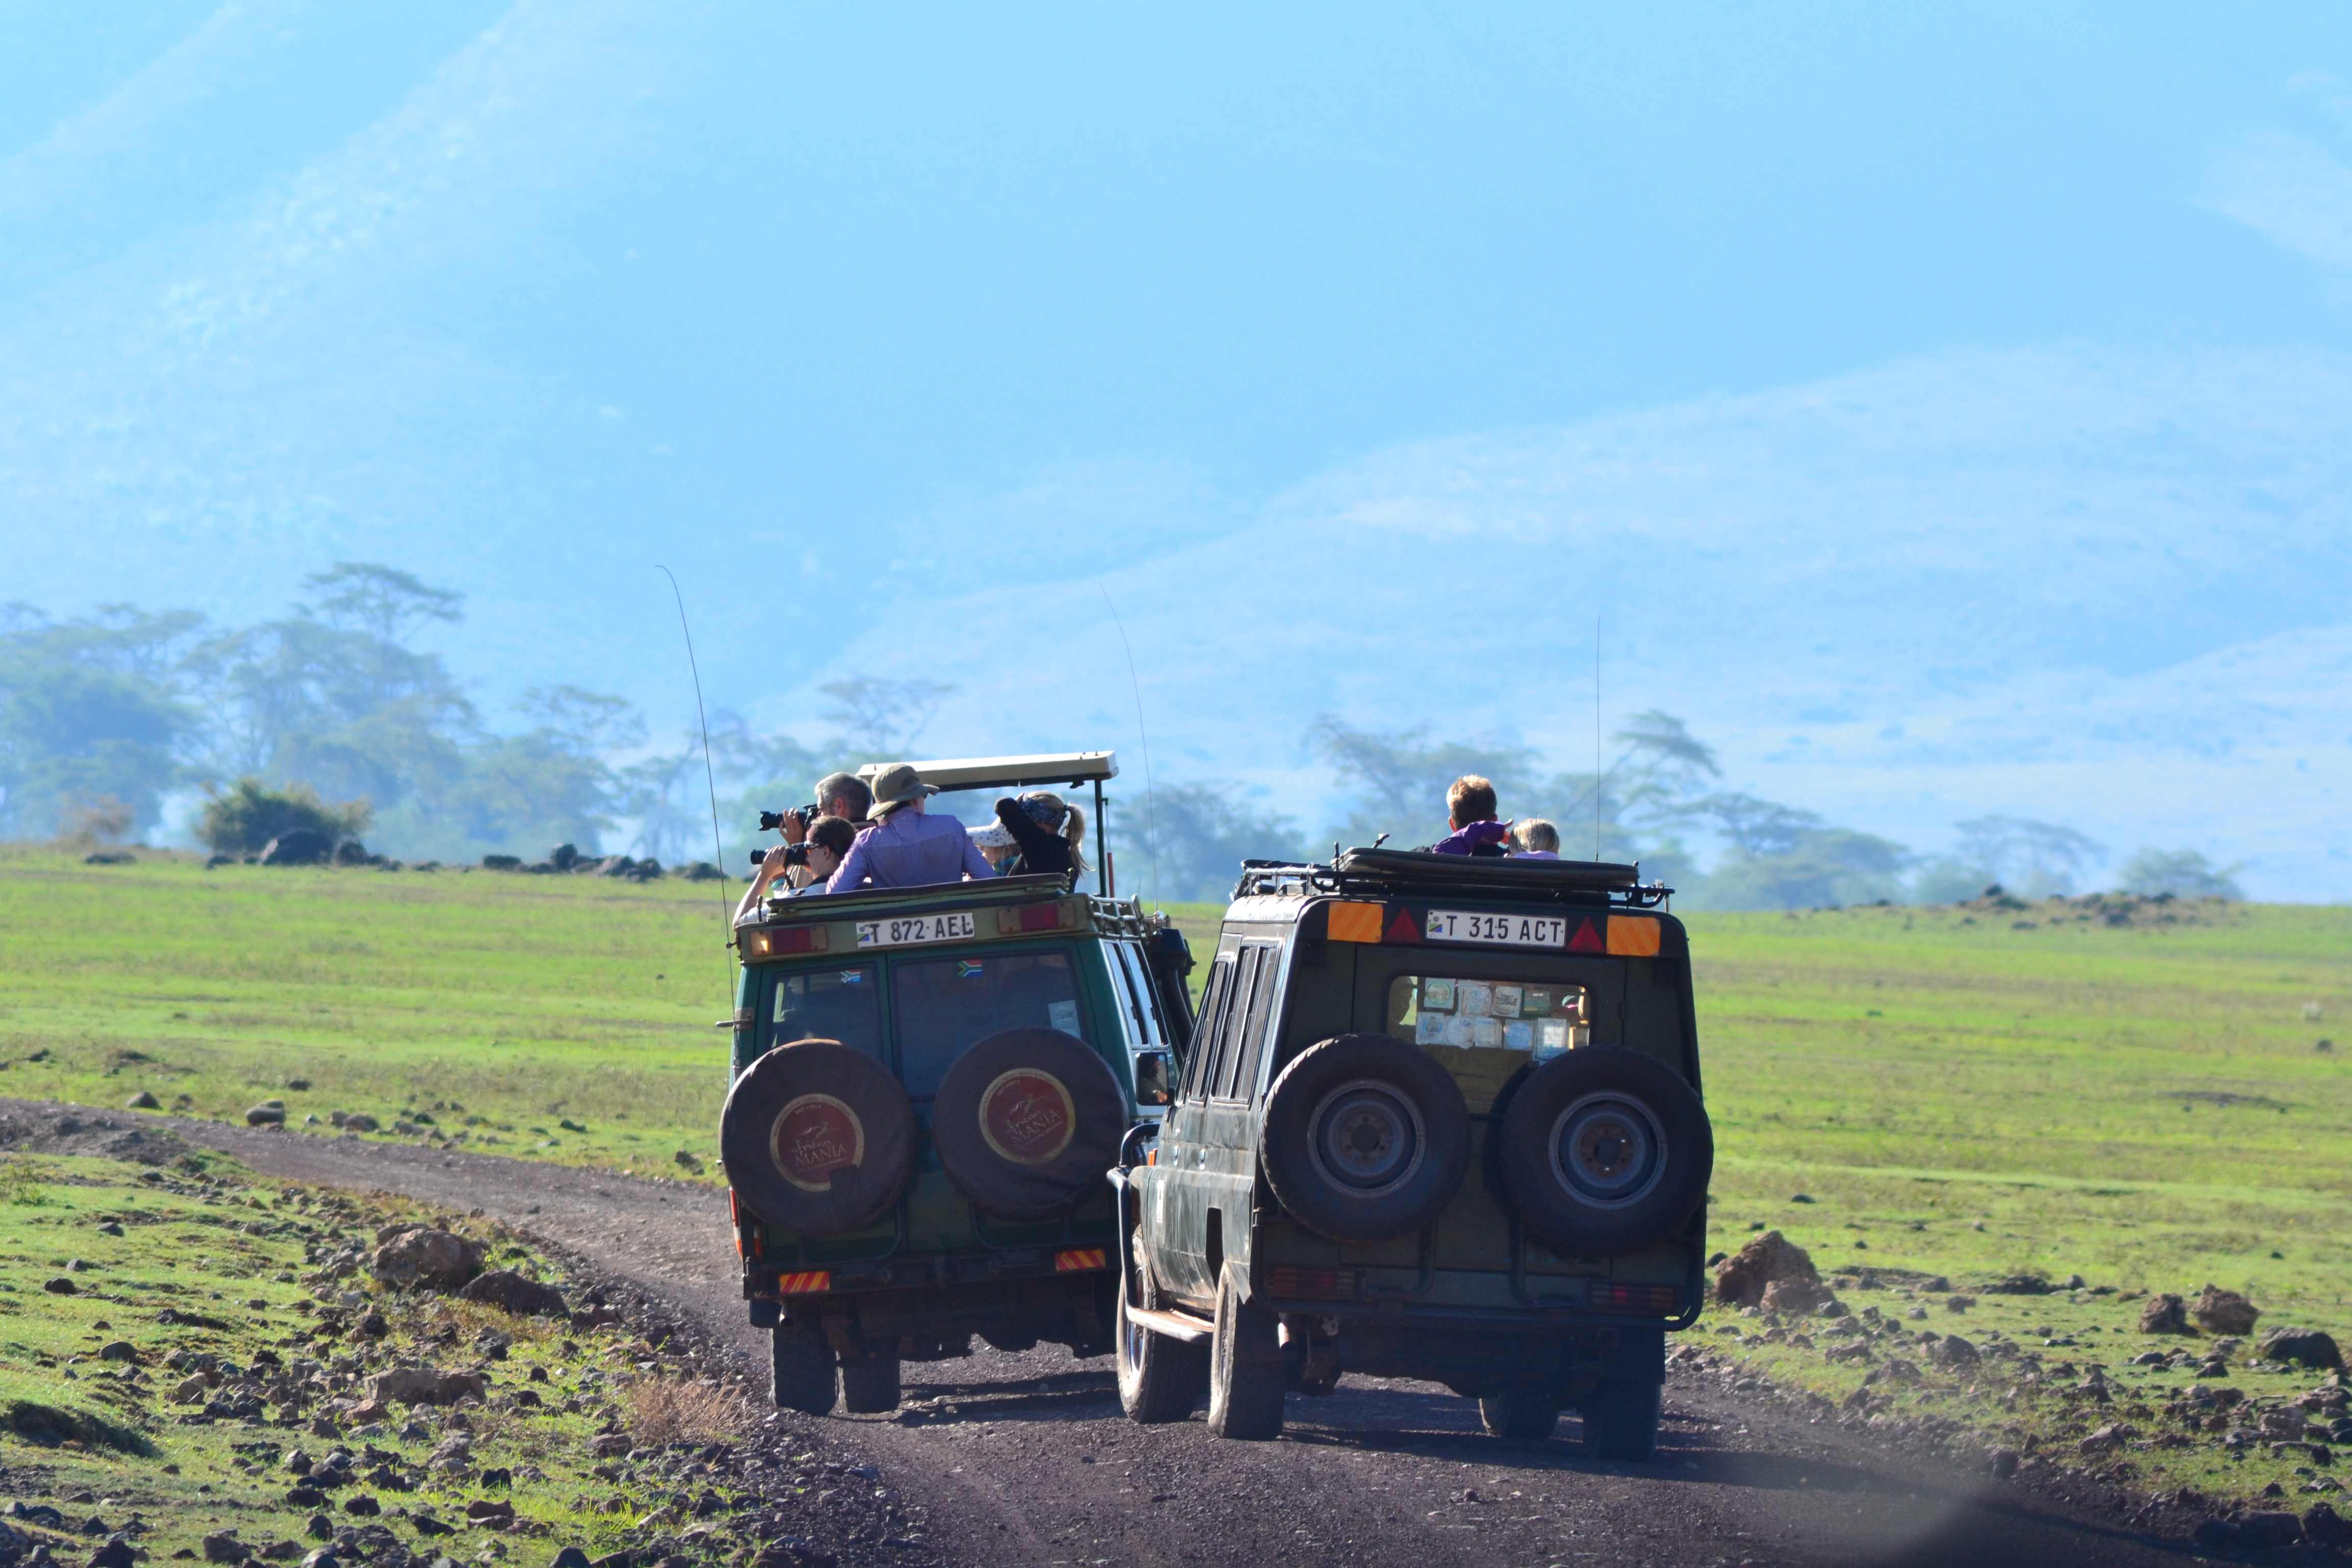 Overlanding is the best way to see Africa on a budget